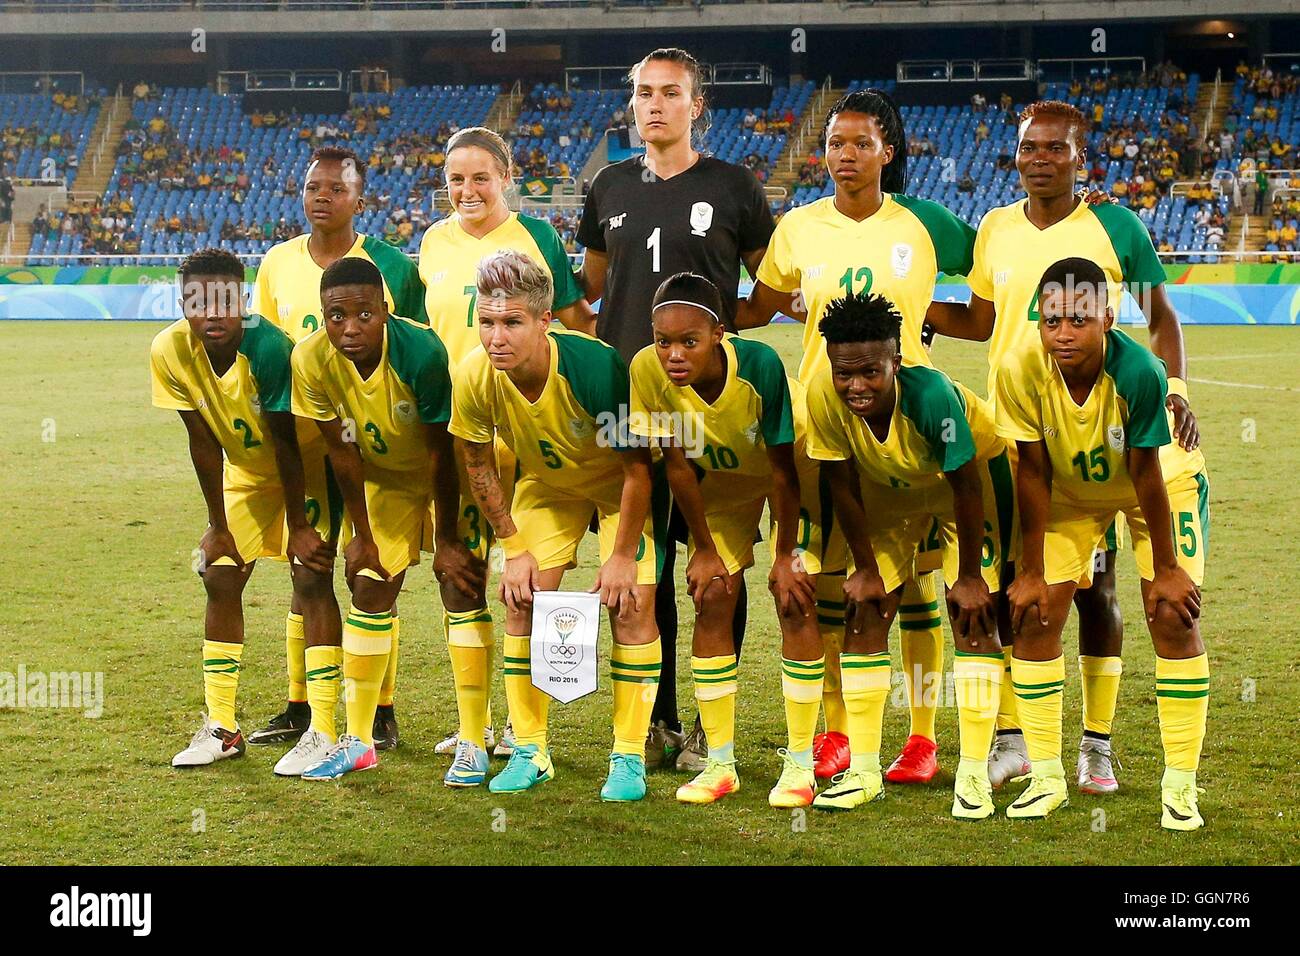 RIO DE JANEIRO, RJ - 06.08.2016: OLYMPICS 2016 FOOTBALL RJ - Selection of South Africa during the dispute between South Africa (AFS) and China (CHI) Group E of the Olympic Women&#39;s Foot oll of the Rio 2016 Olympic Games held in the Olympic Stadium in the host city Rio de Janeiro. (Photo: Marco Galvão/Fotoarena) Stock Photo